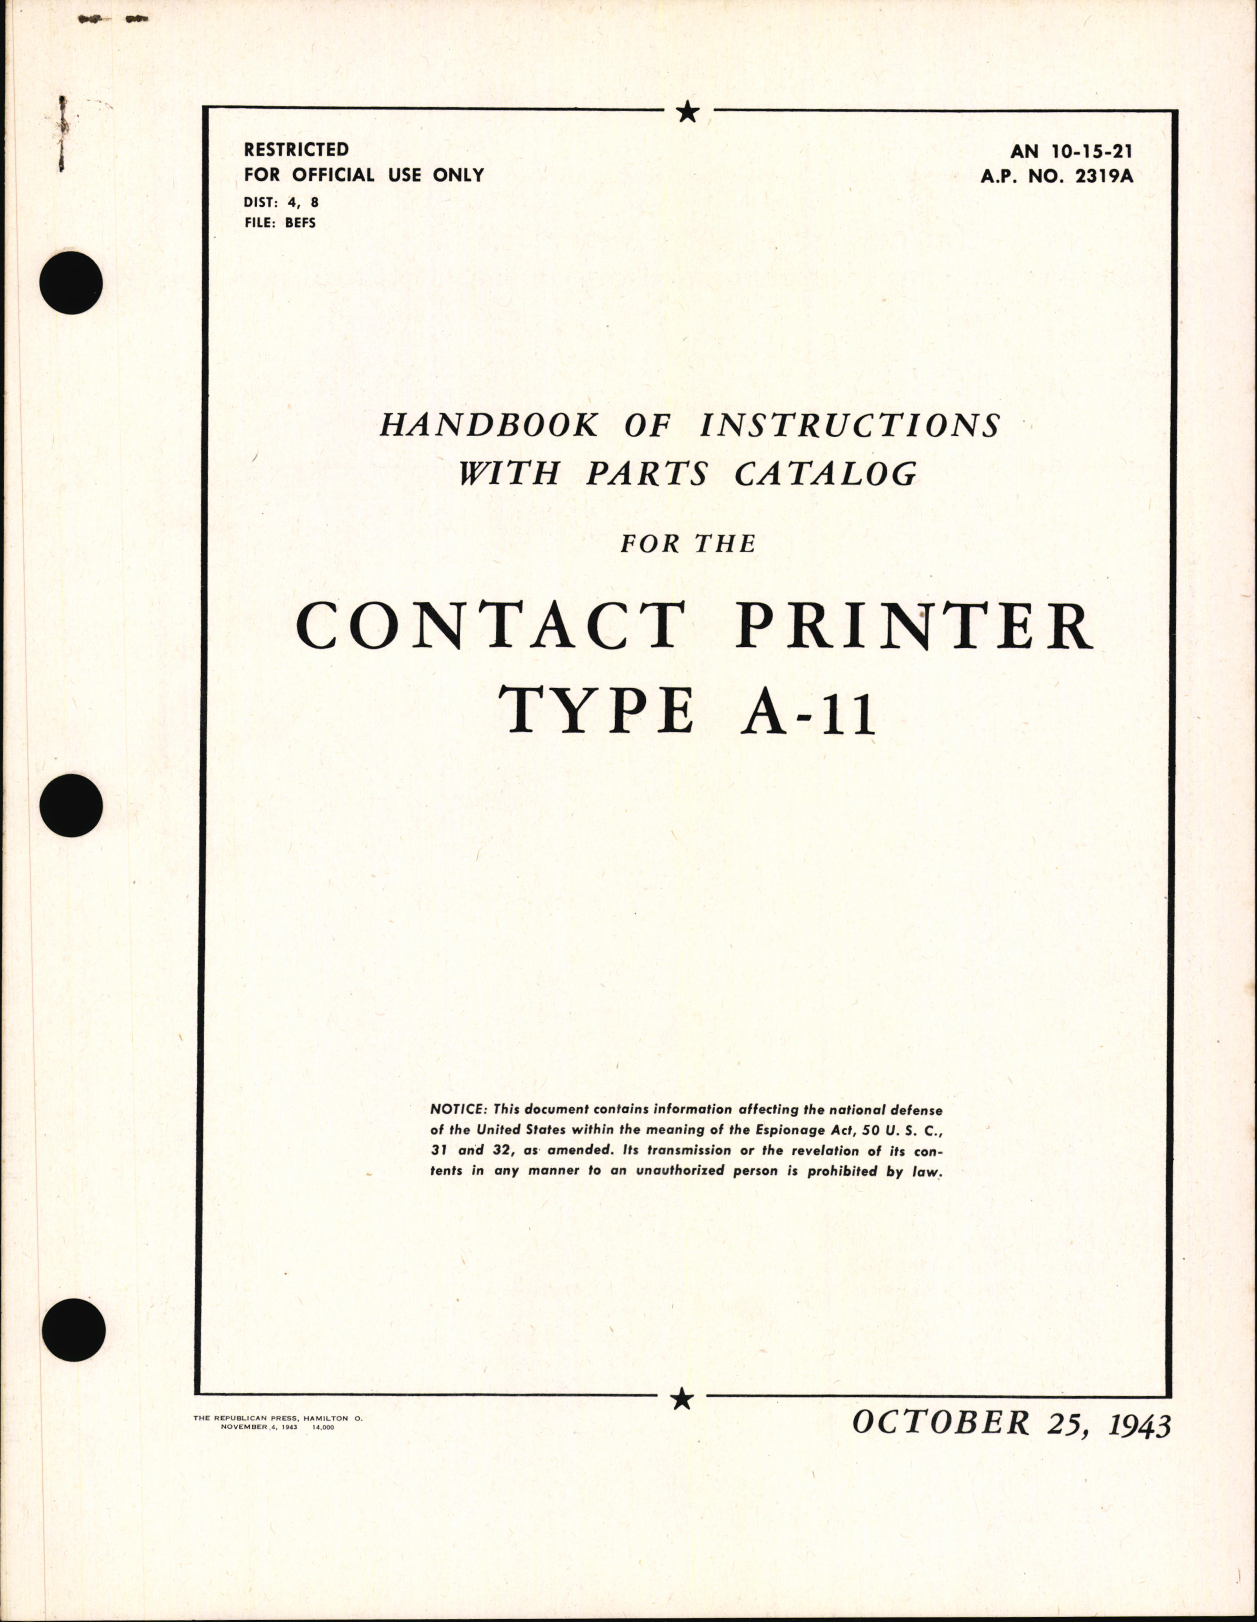 Sample page 1 from AirCorps Library document: Handbook of Instructions with Parts Catalog for Type A-11 Contact Printer